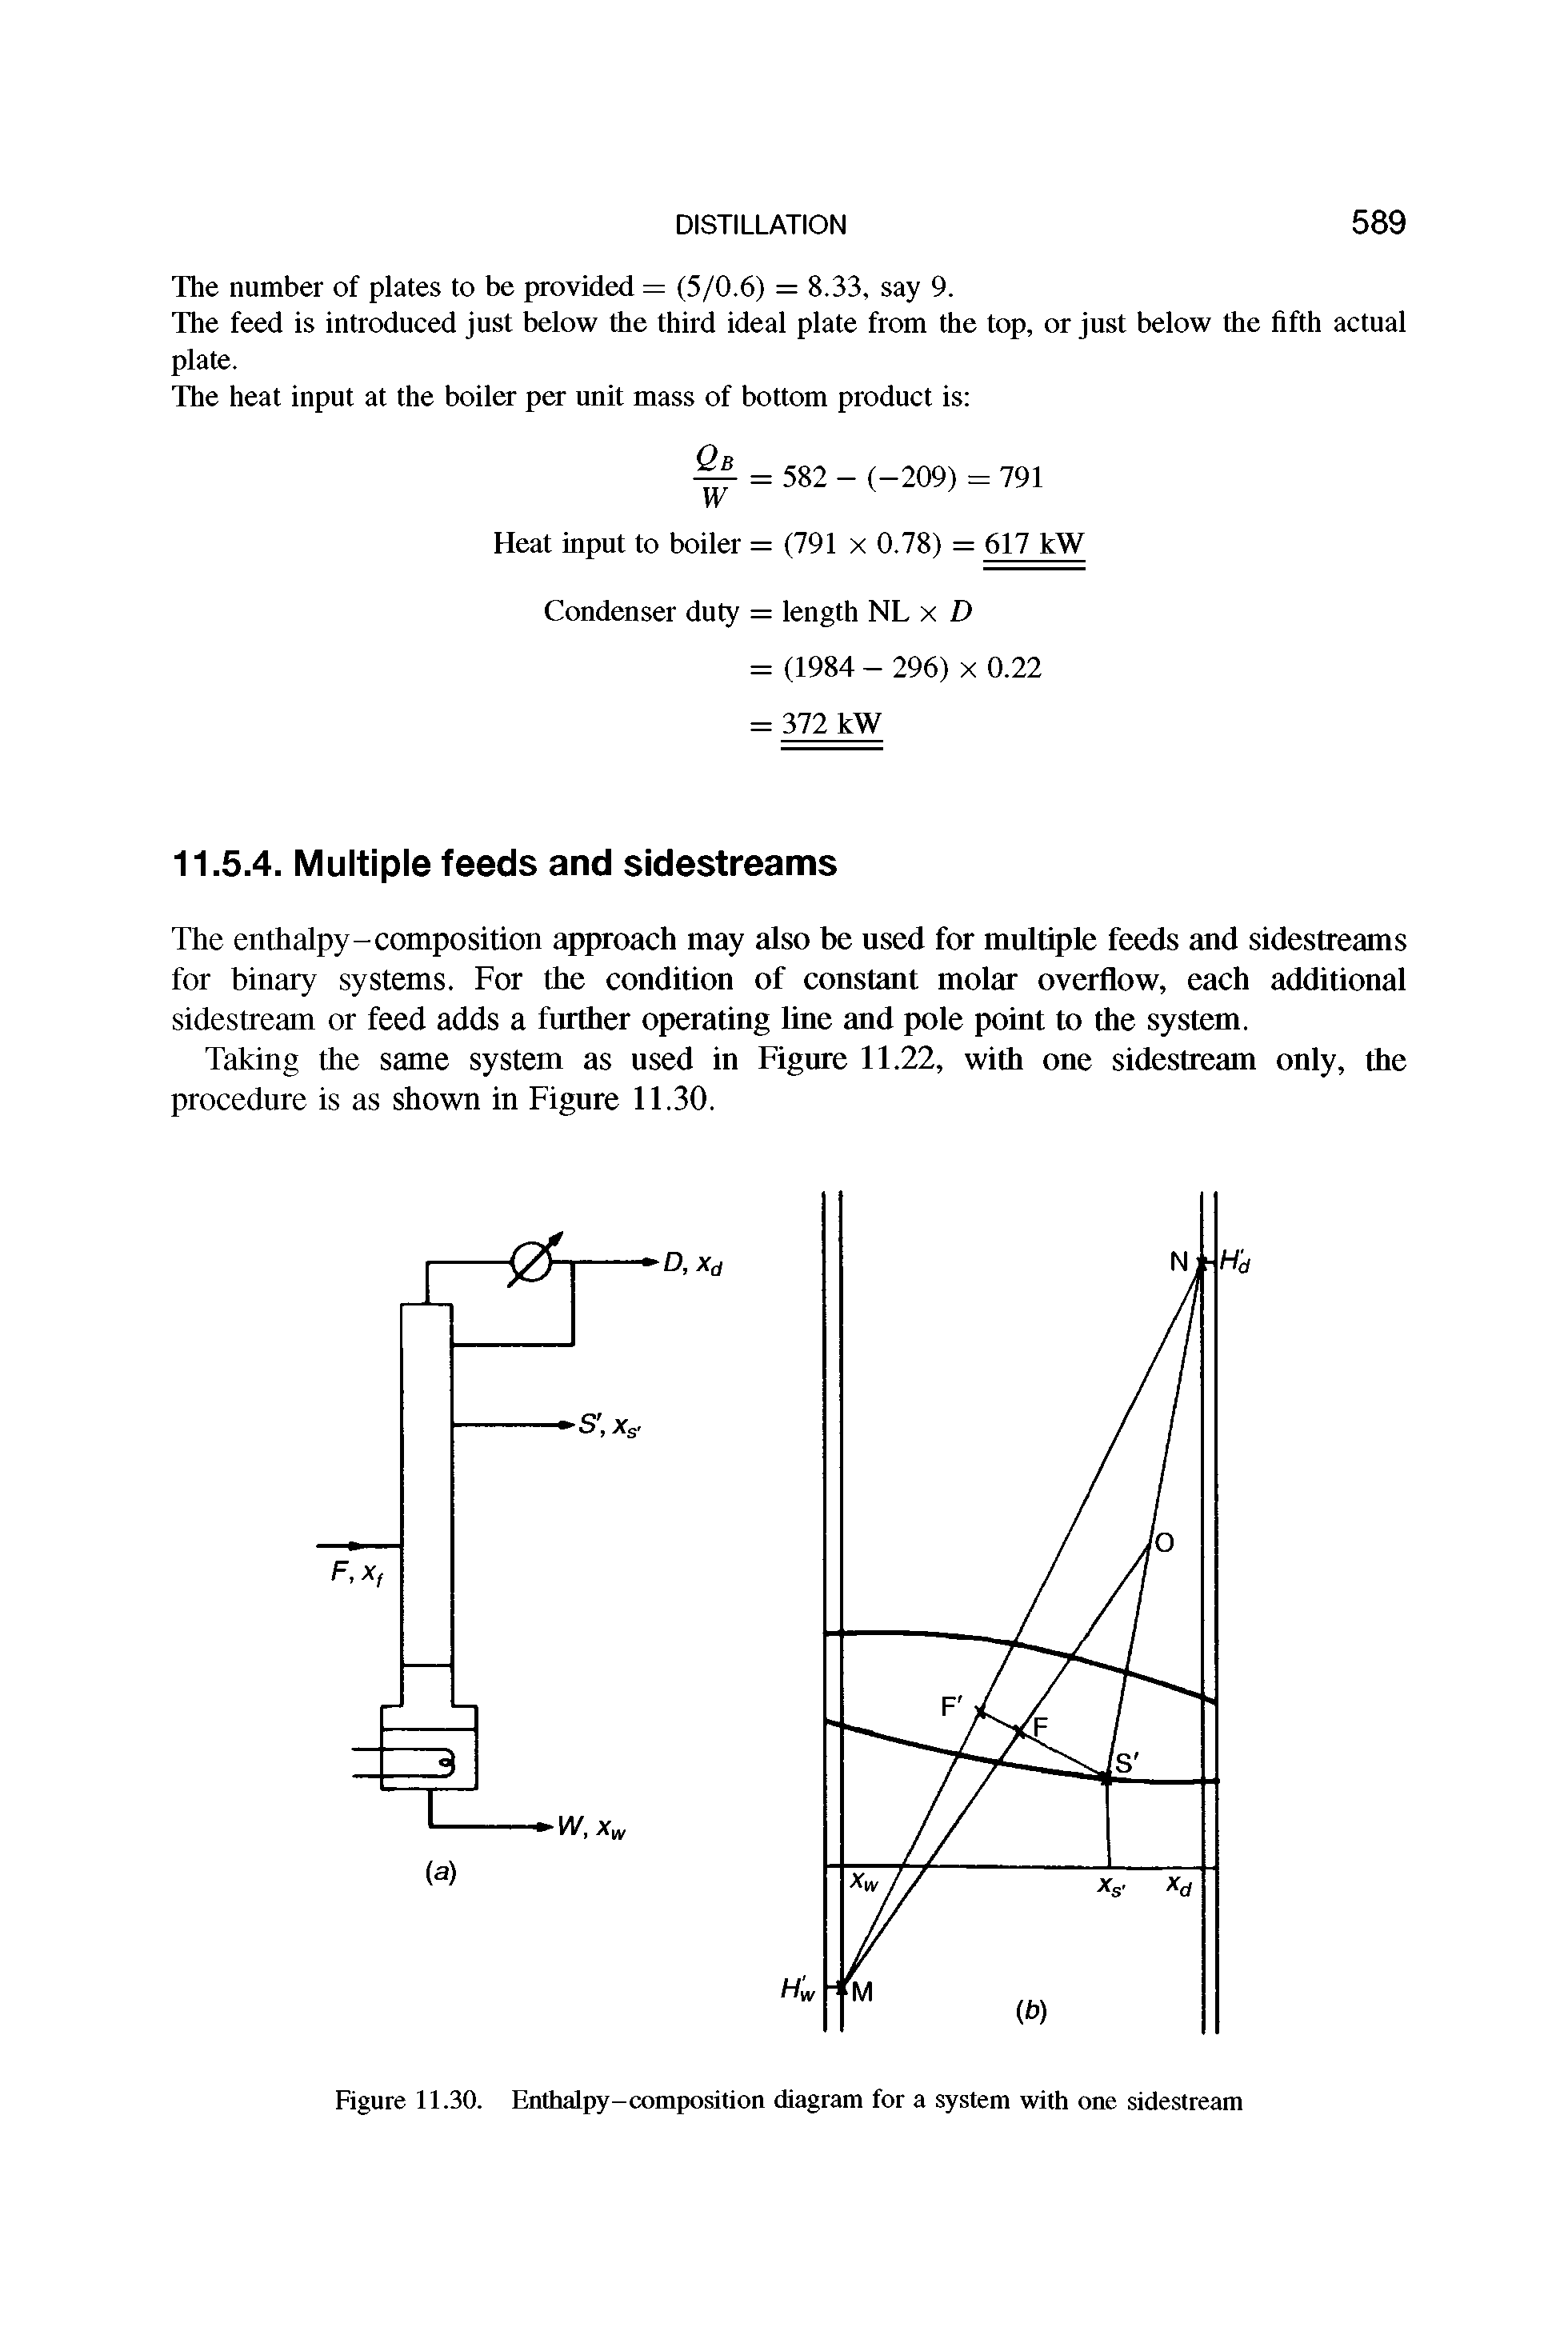 Figure 11.30. Enthalpy-composition diagram for a system with one sidestream...